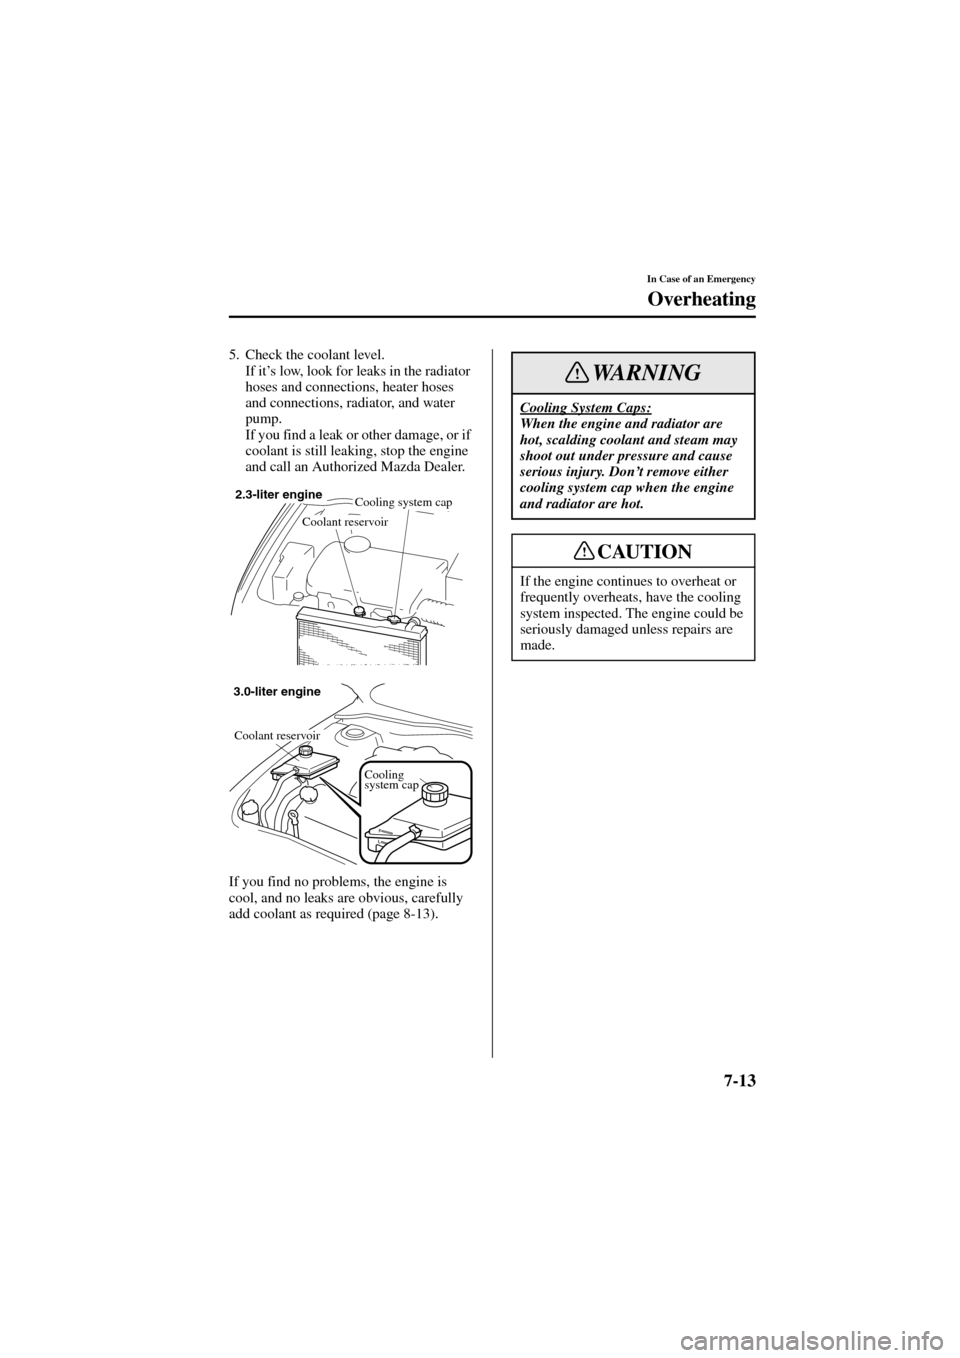 MAZDA MODEL 6 2004  Owners Manual (in English) 7-13
In Case of an Emergency
Overheating
Form No. 8R29-EA-02I
5. Check the coolant level.
If it’s low, look for leaks in the radiator 
hoses and connections, heater hoses 
and connections, radiator,